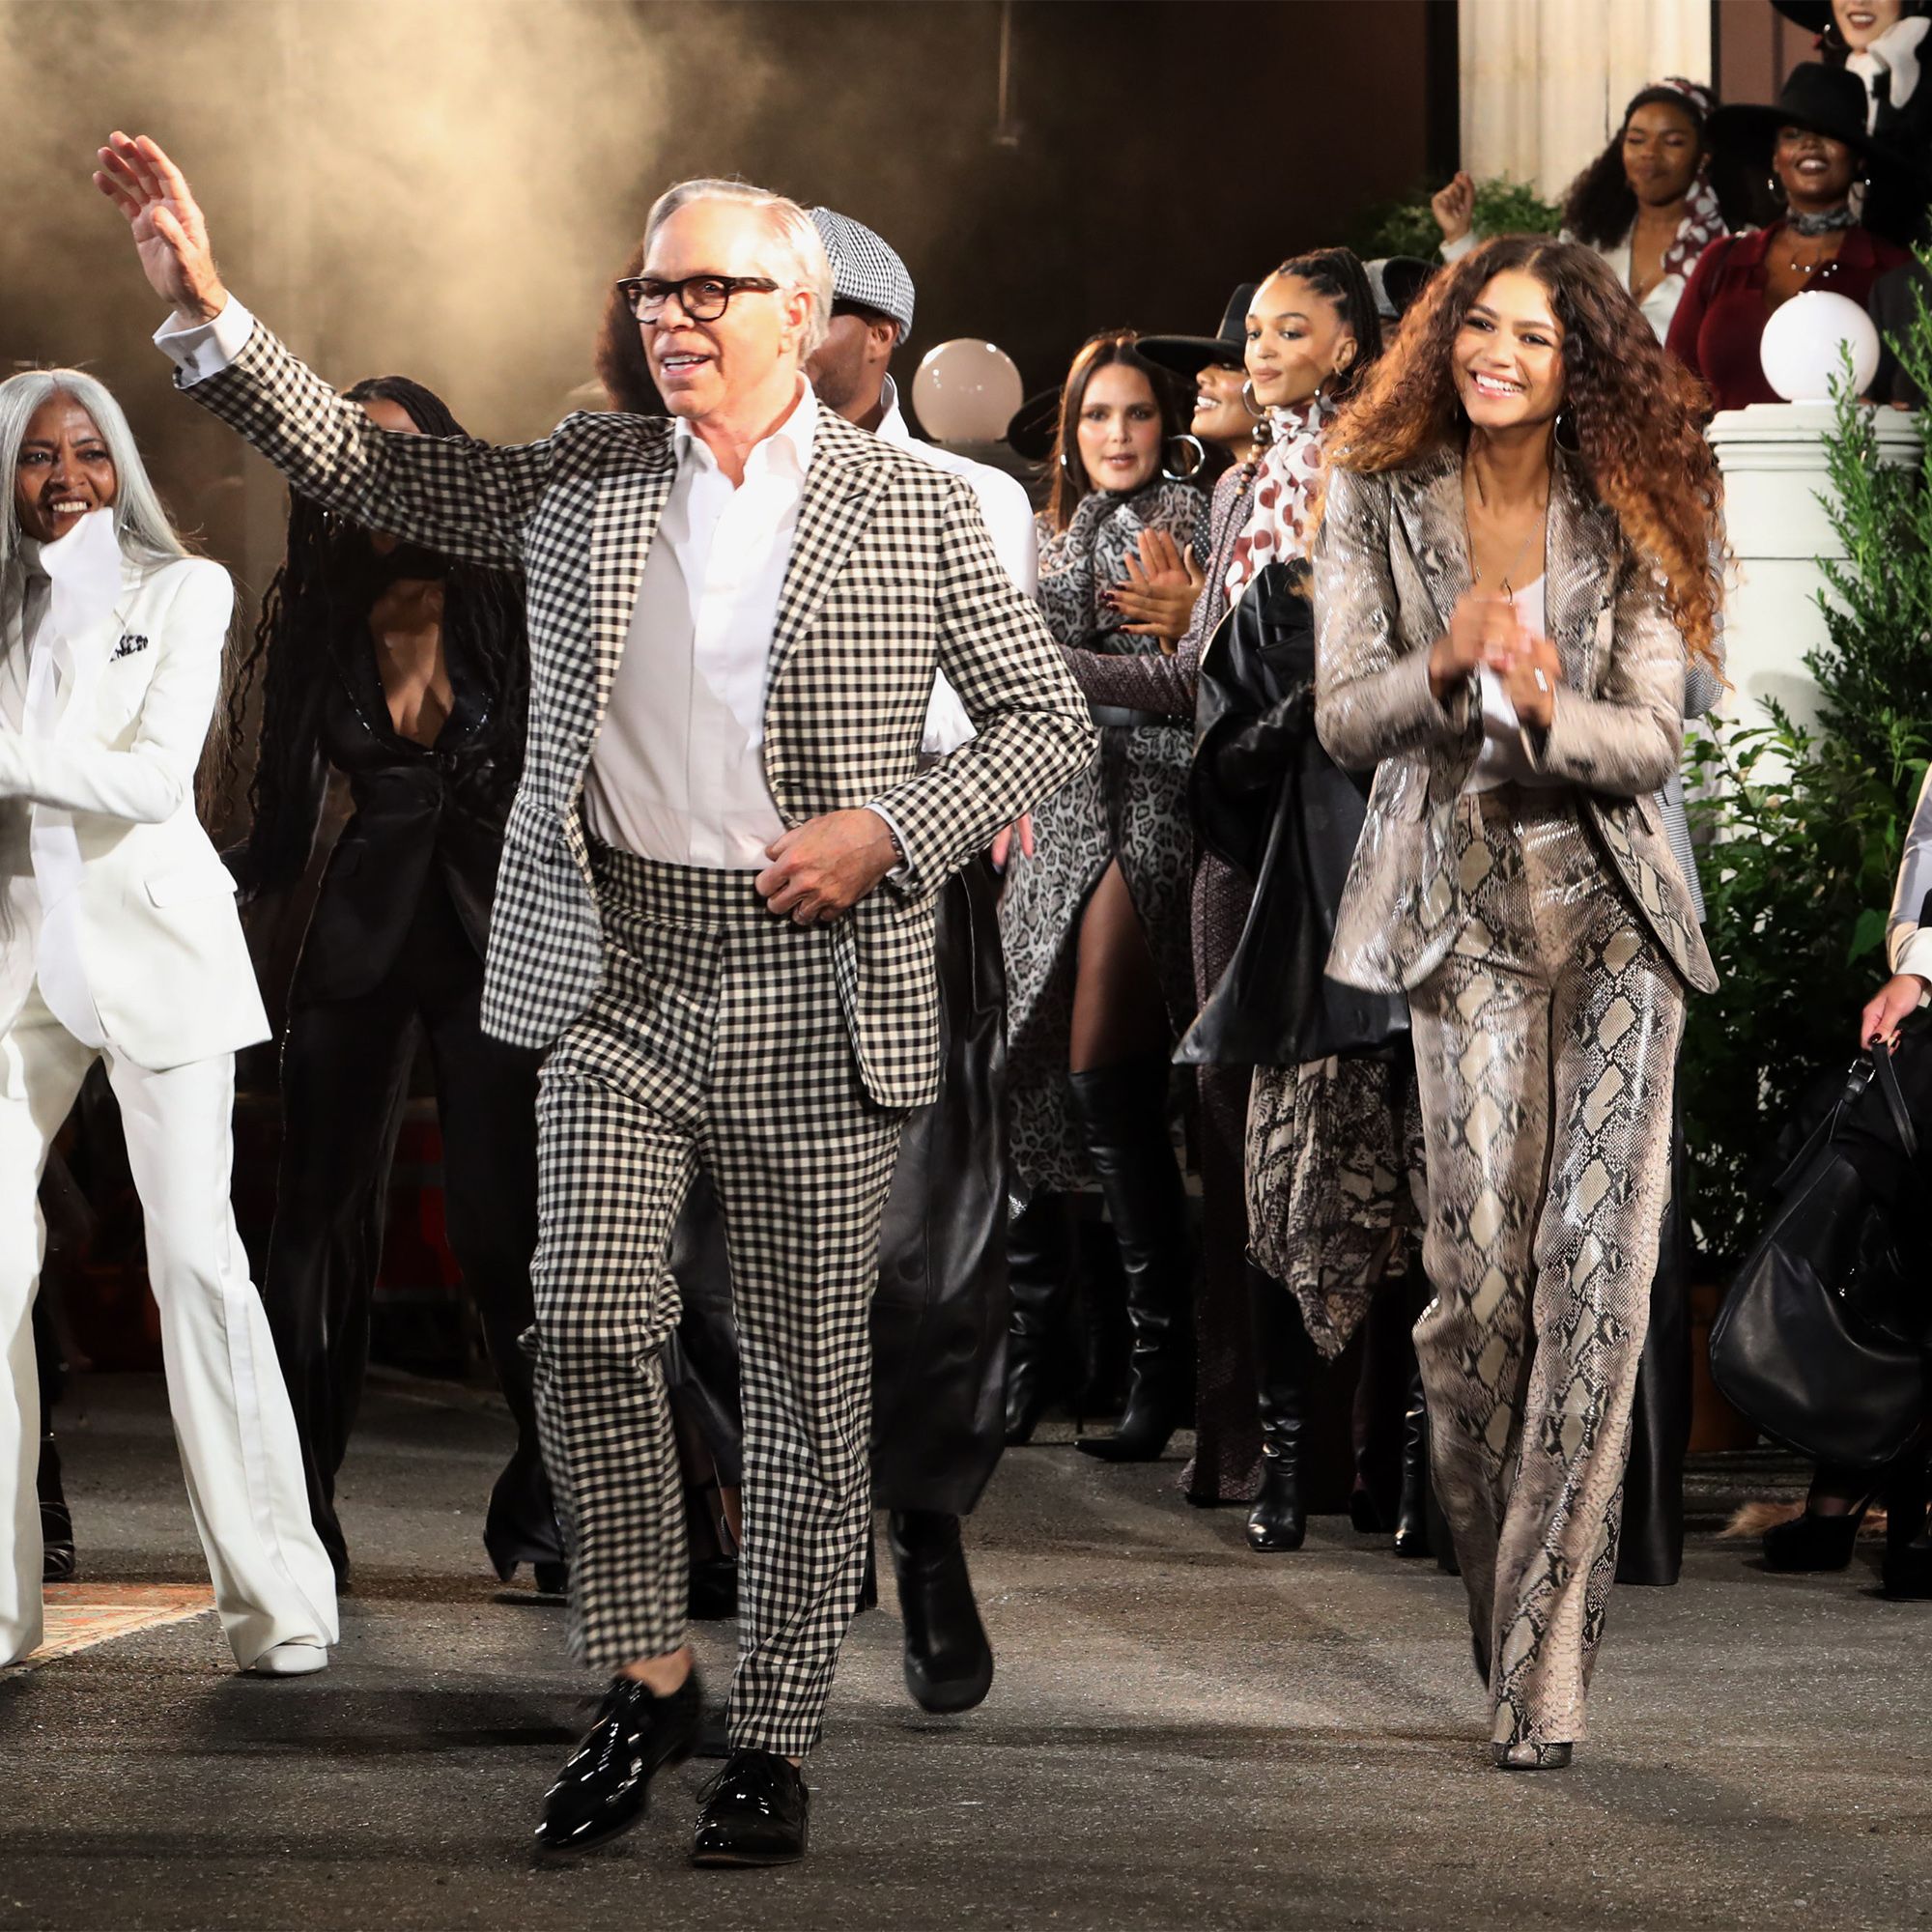 Zendaya and Tommy Hilfiger Show at 